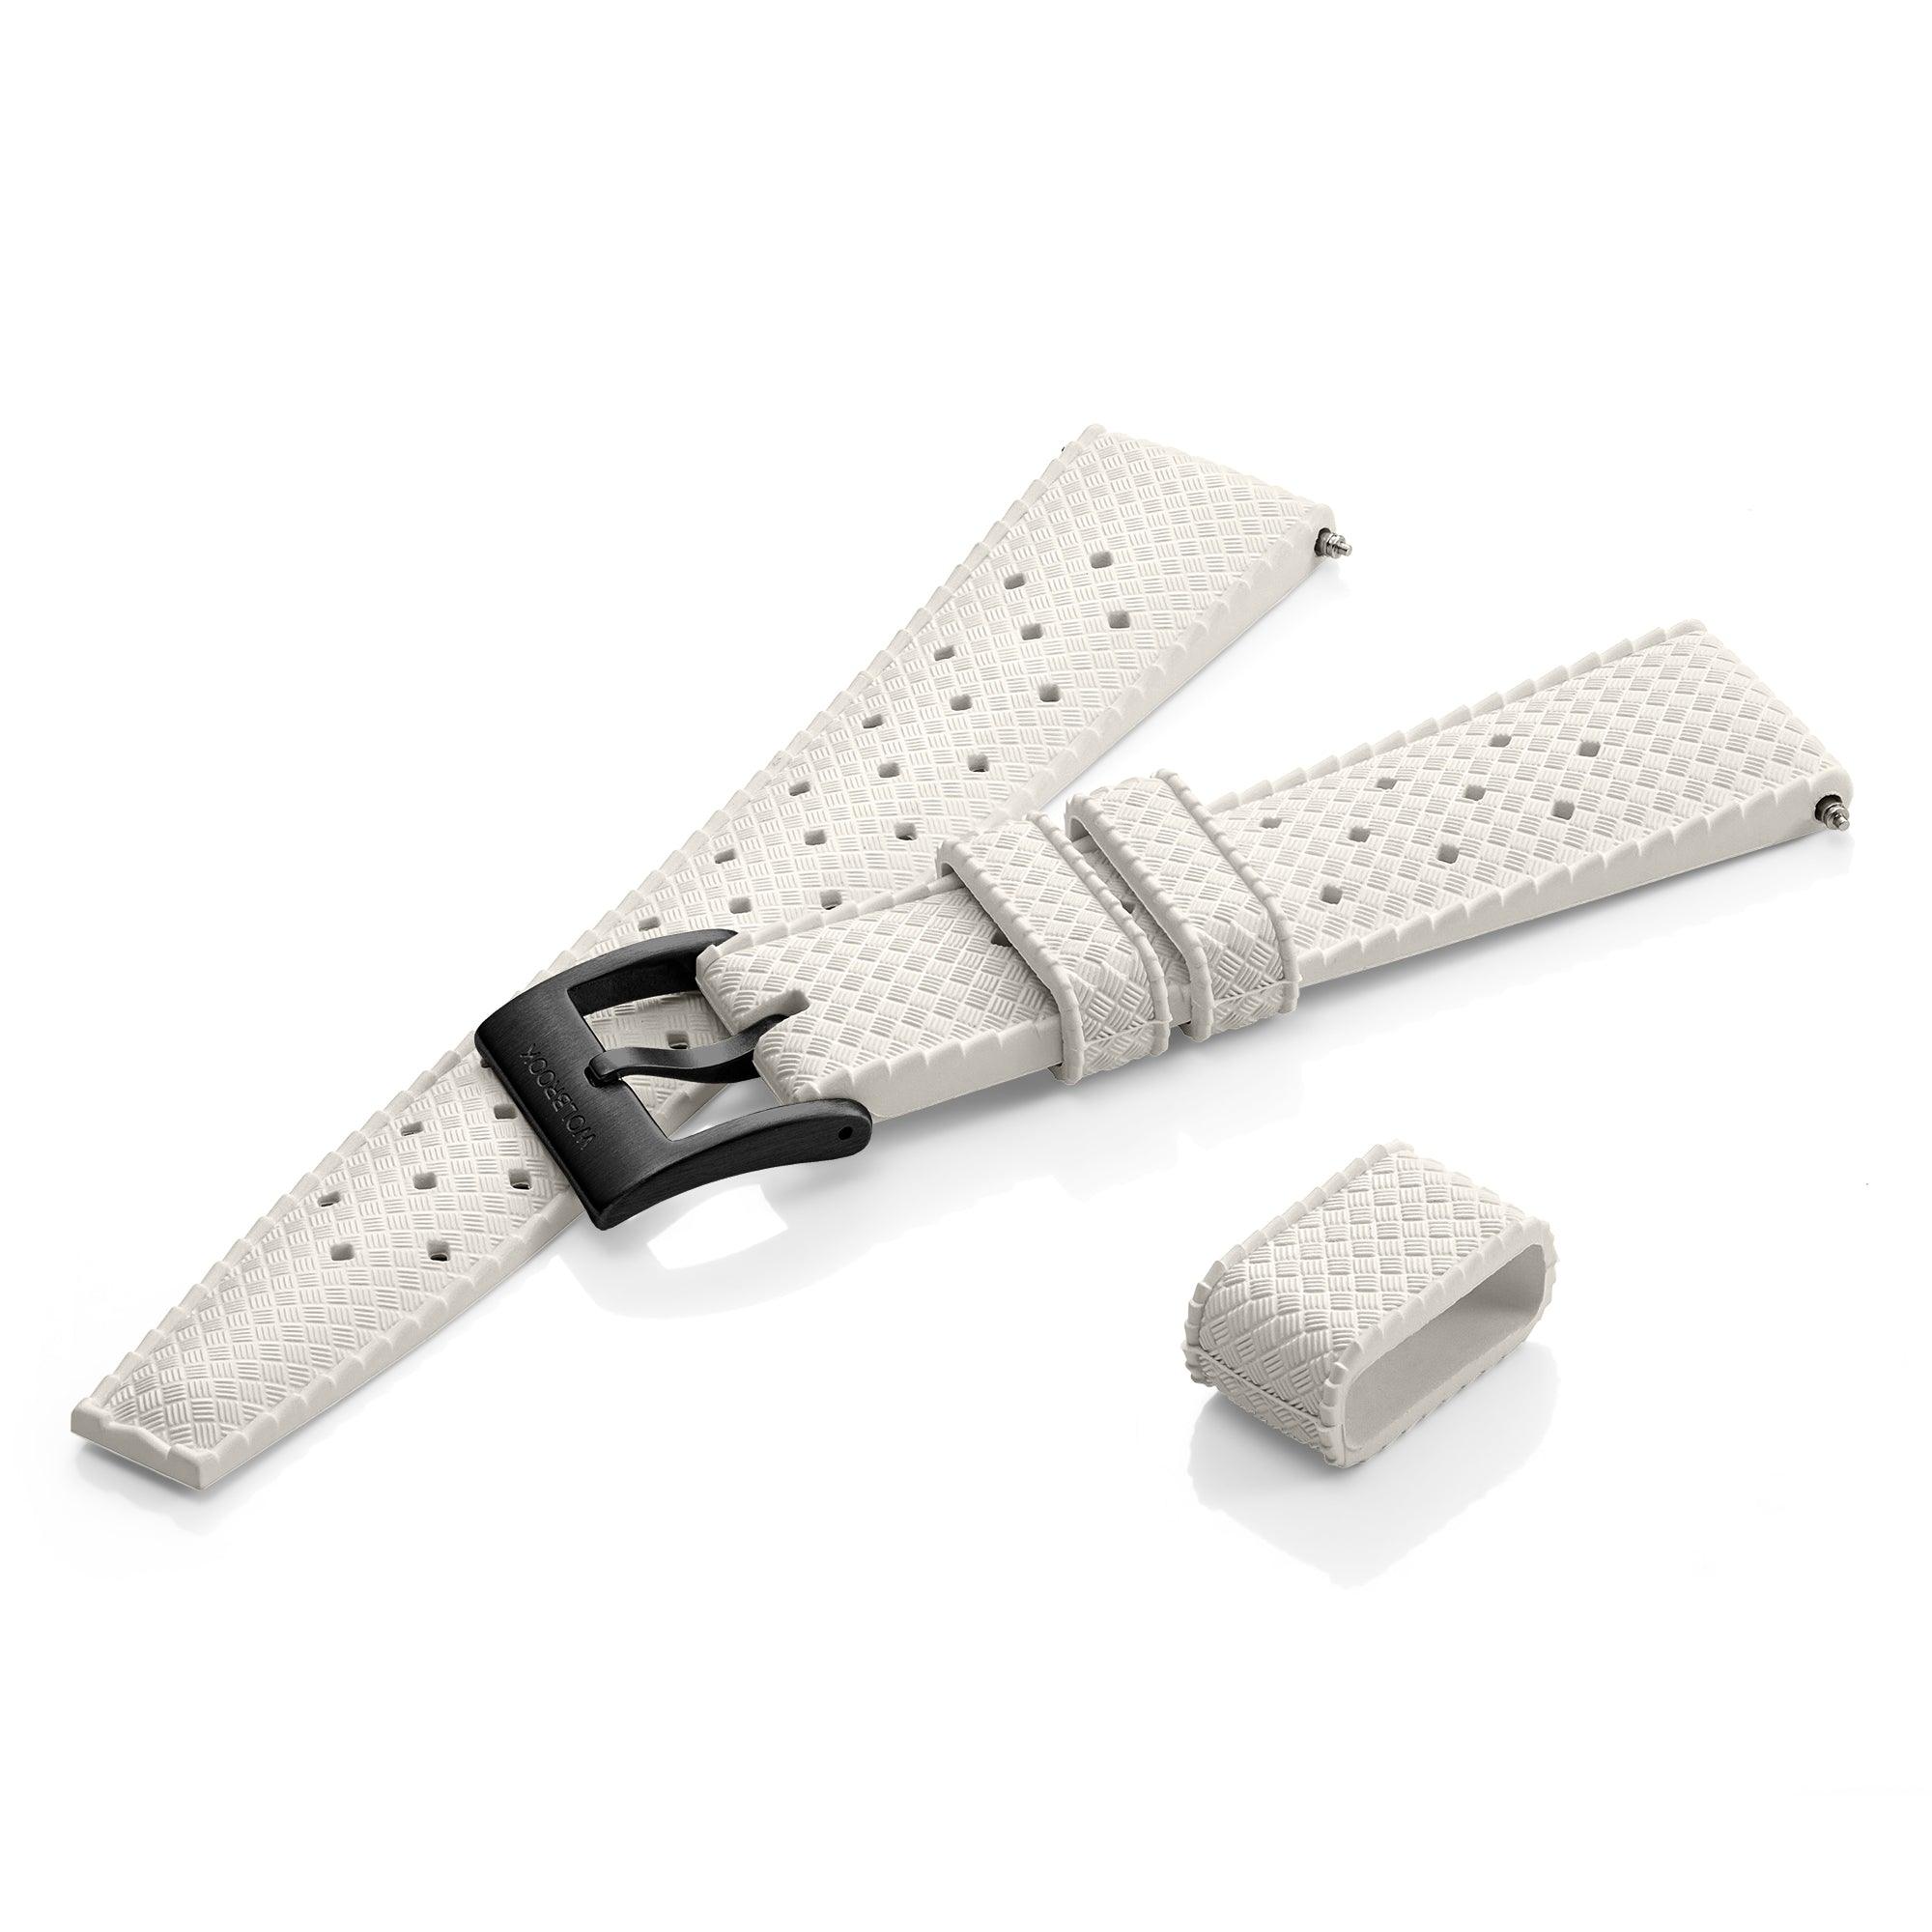 White Tropic Rubber Strap & Black PVD Steel Buckle - Wolbrook Watches